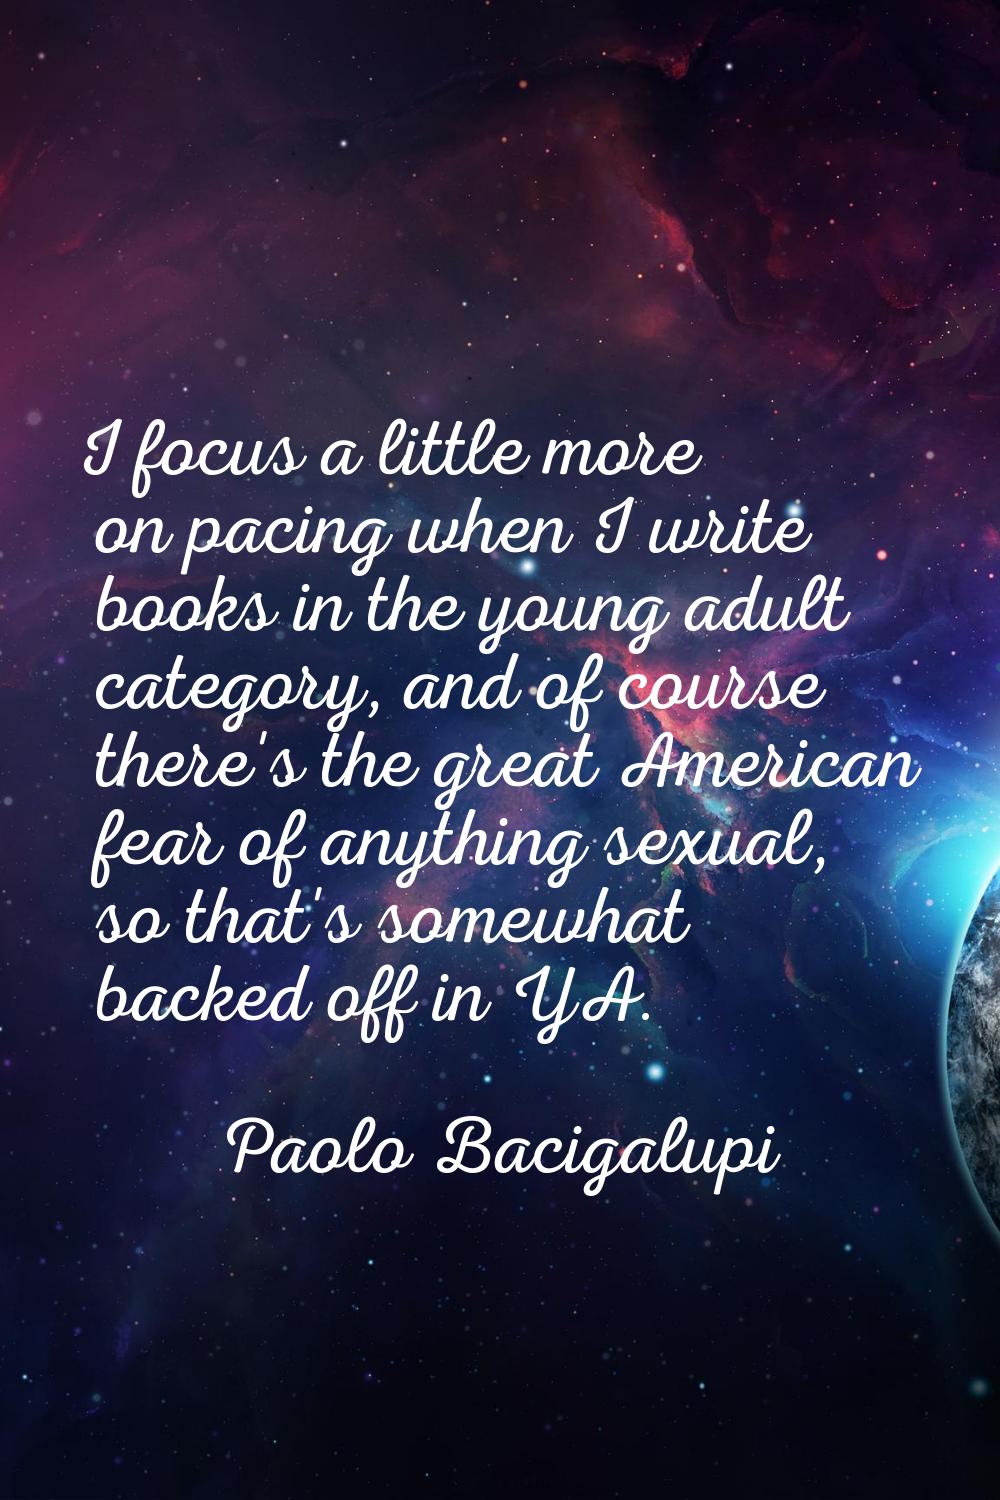 I focus a little more on pacing when I write books in the young adult category, and of course there